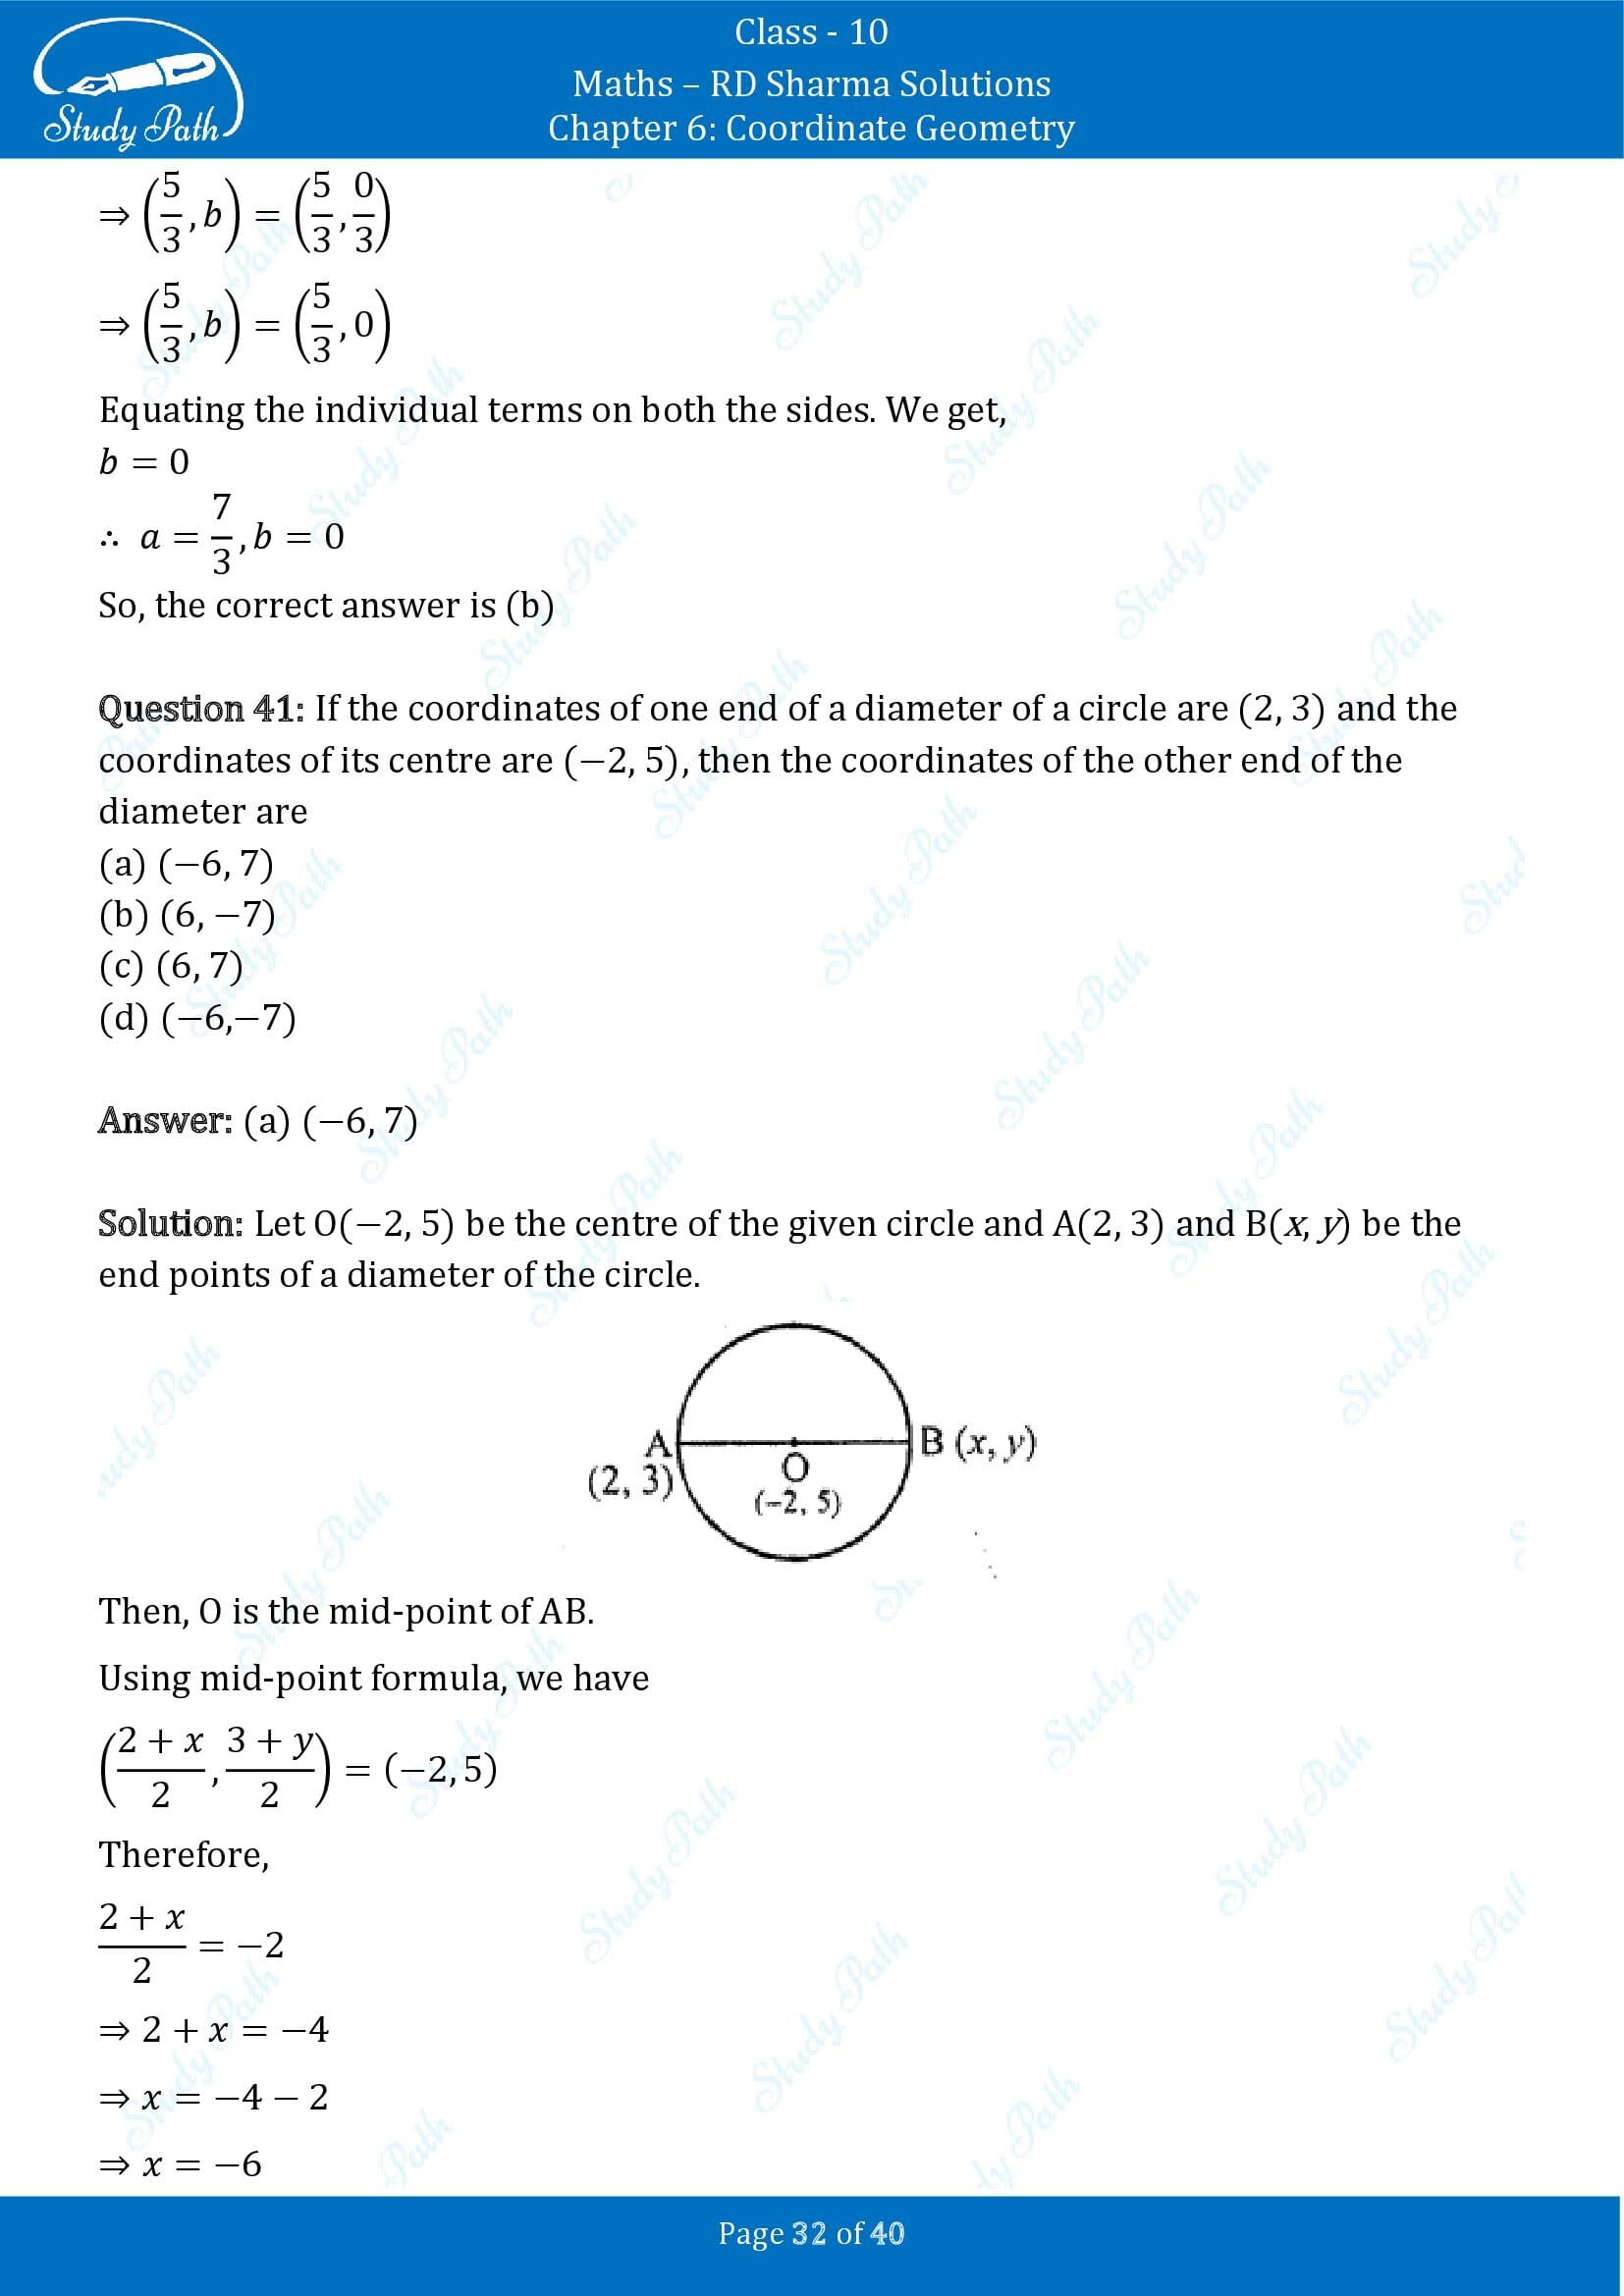 RD Sharma Solutions Class 10 Chapter 6 Coordinate Geometry Multiple Choice Question MCQs 00032